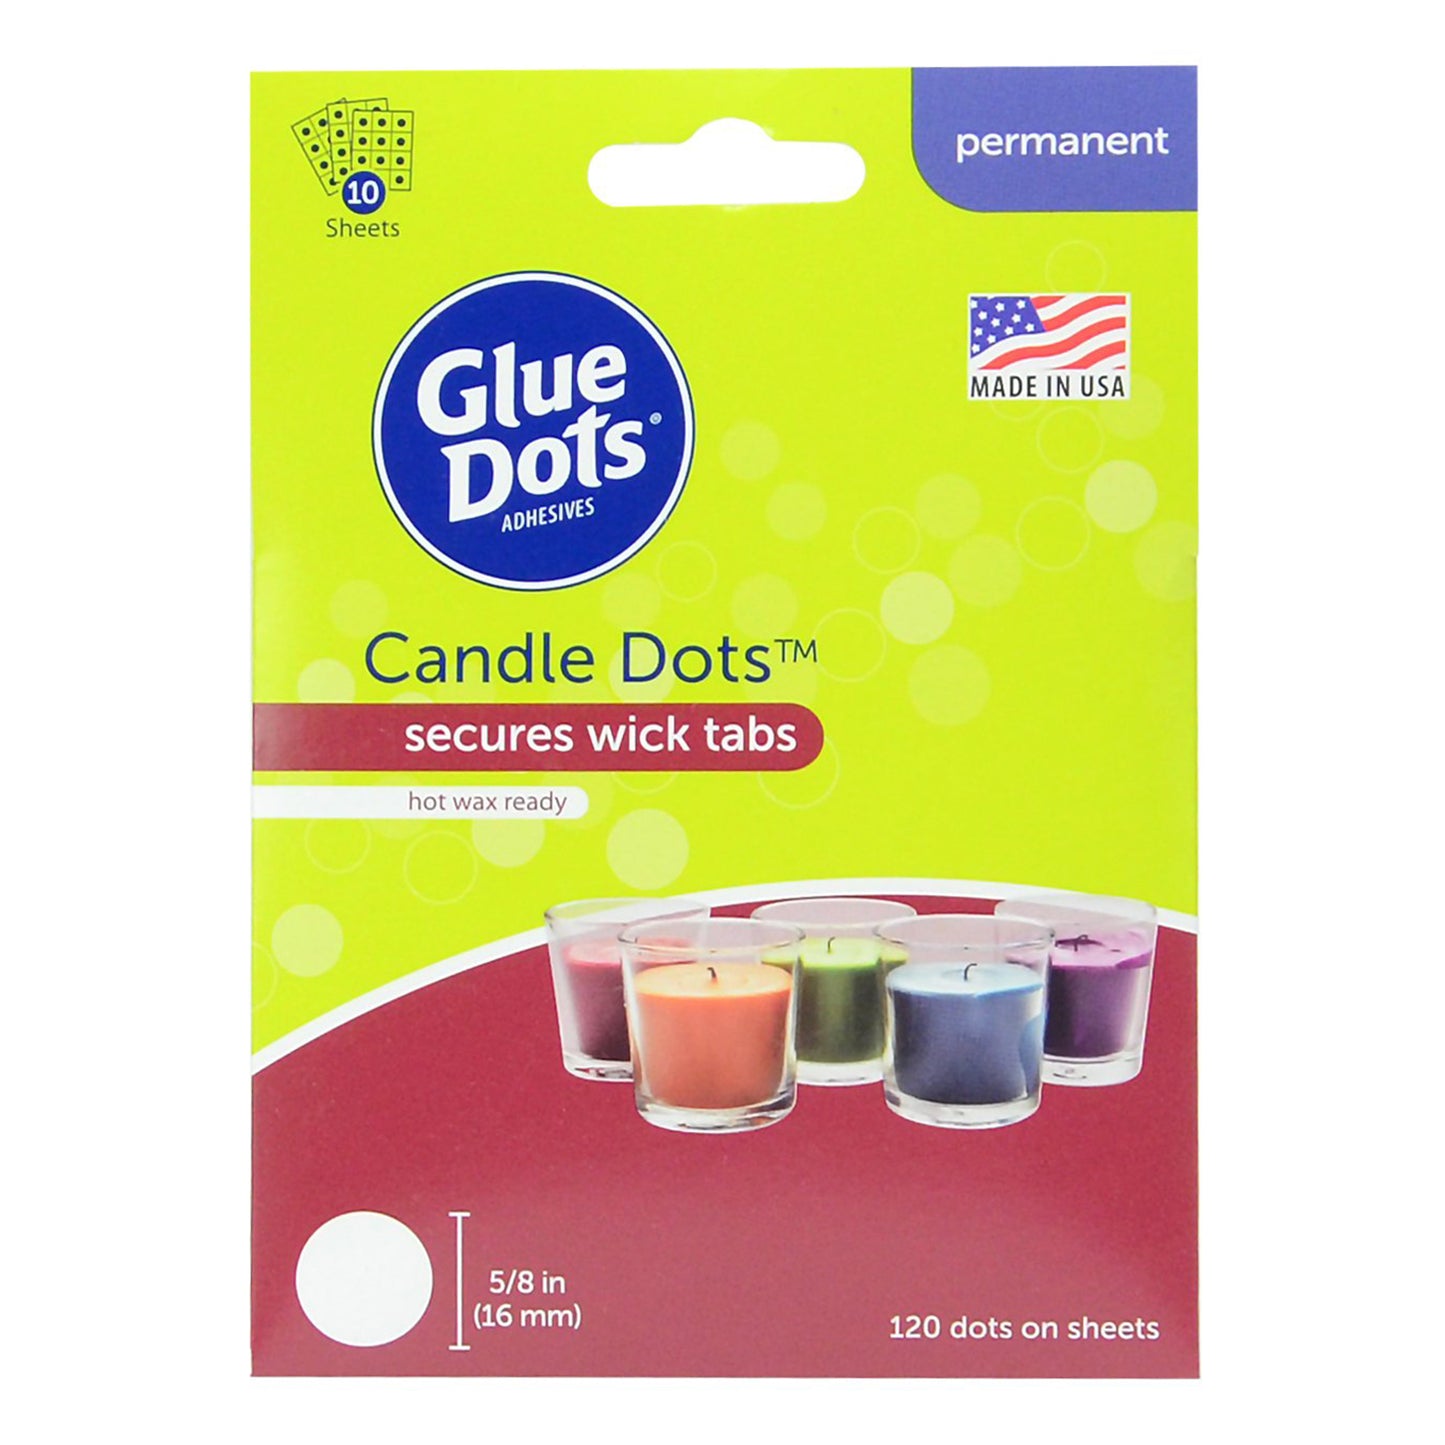 Glue Dots Candle Dots 120 pack